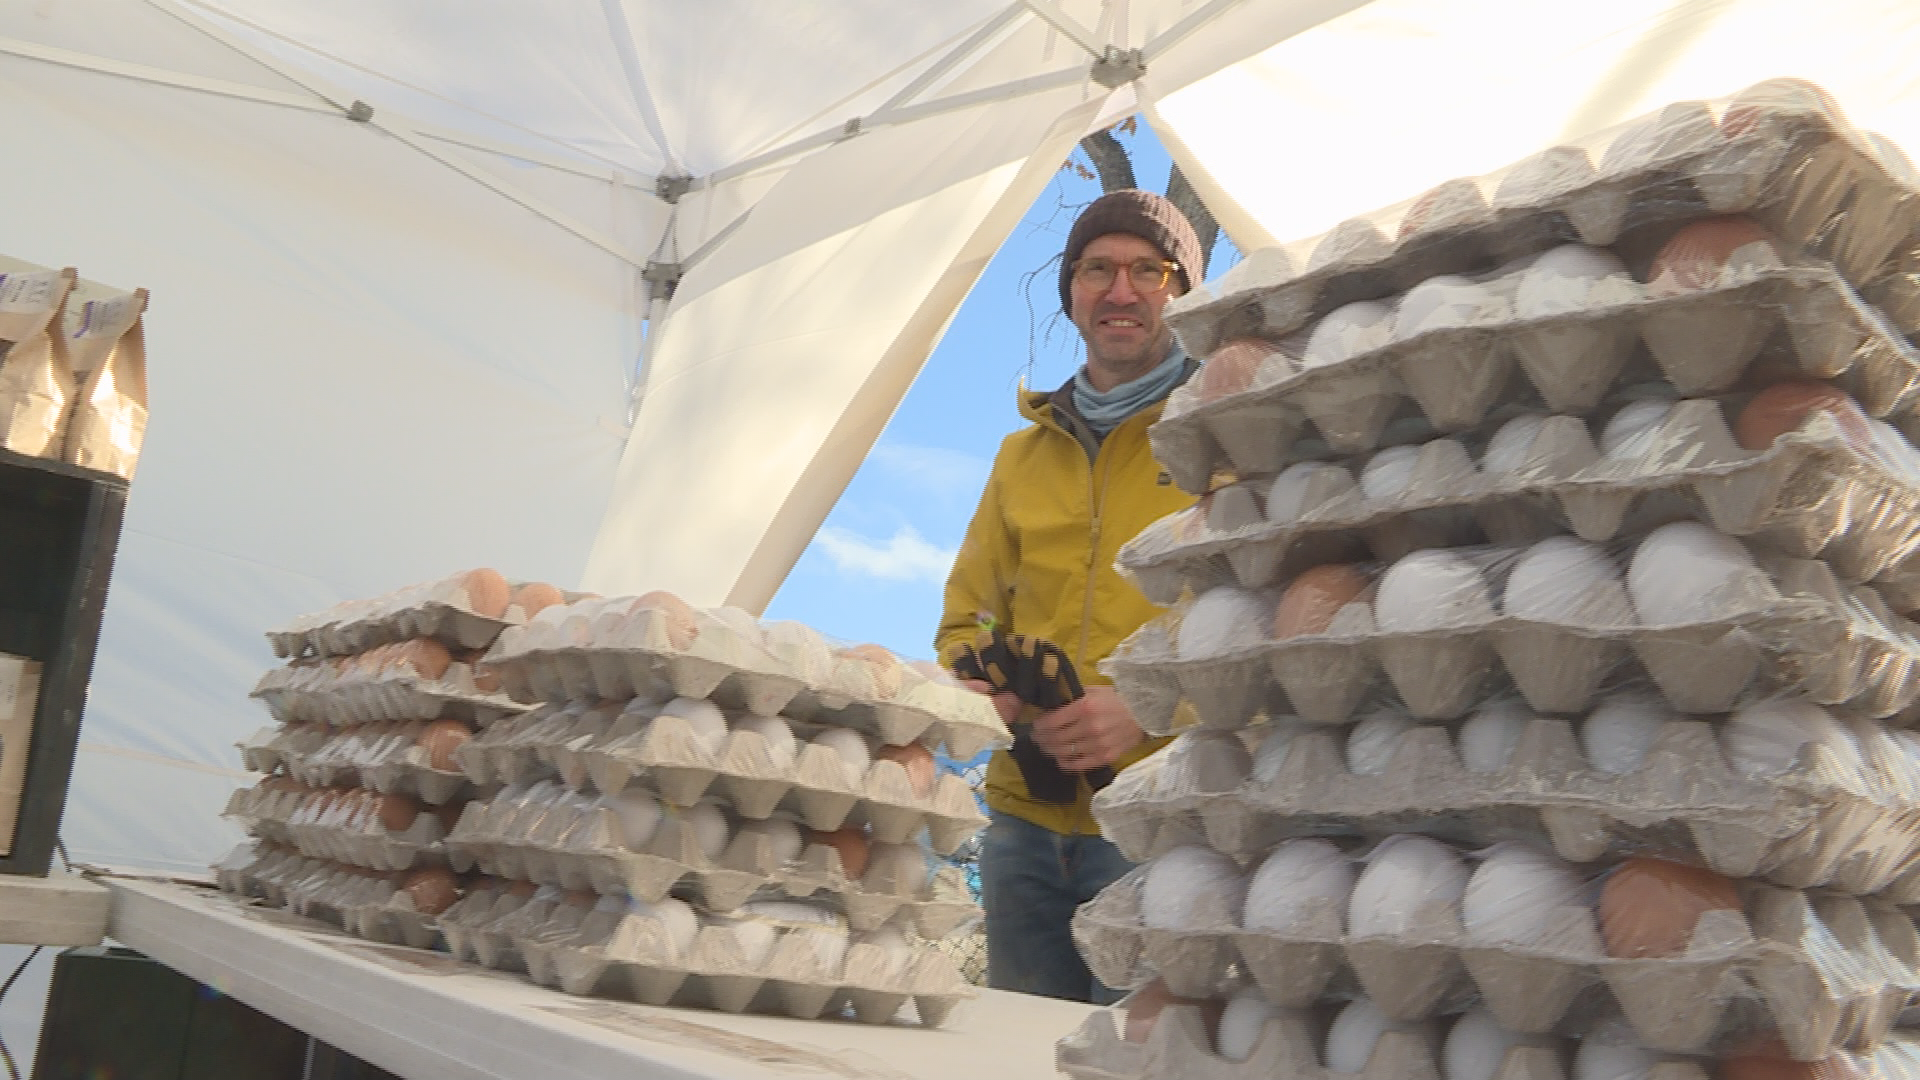 Hermann Grauer, a co-owner of Nature's Farm in Steinbach, standing at his stall during Saturday's edition of the St. Norbert farmers market.